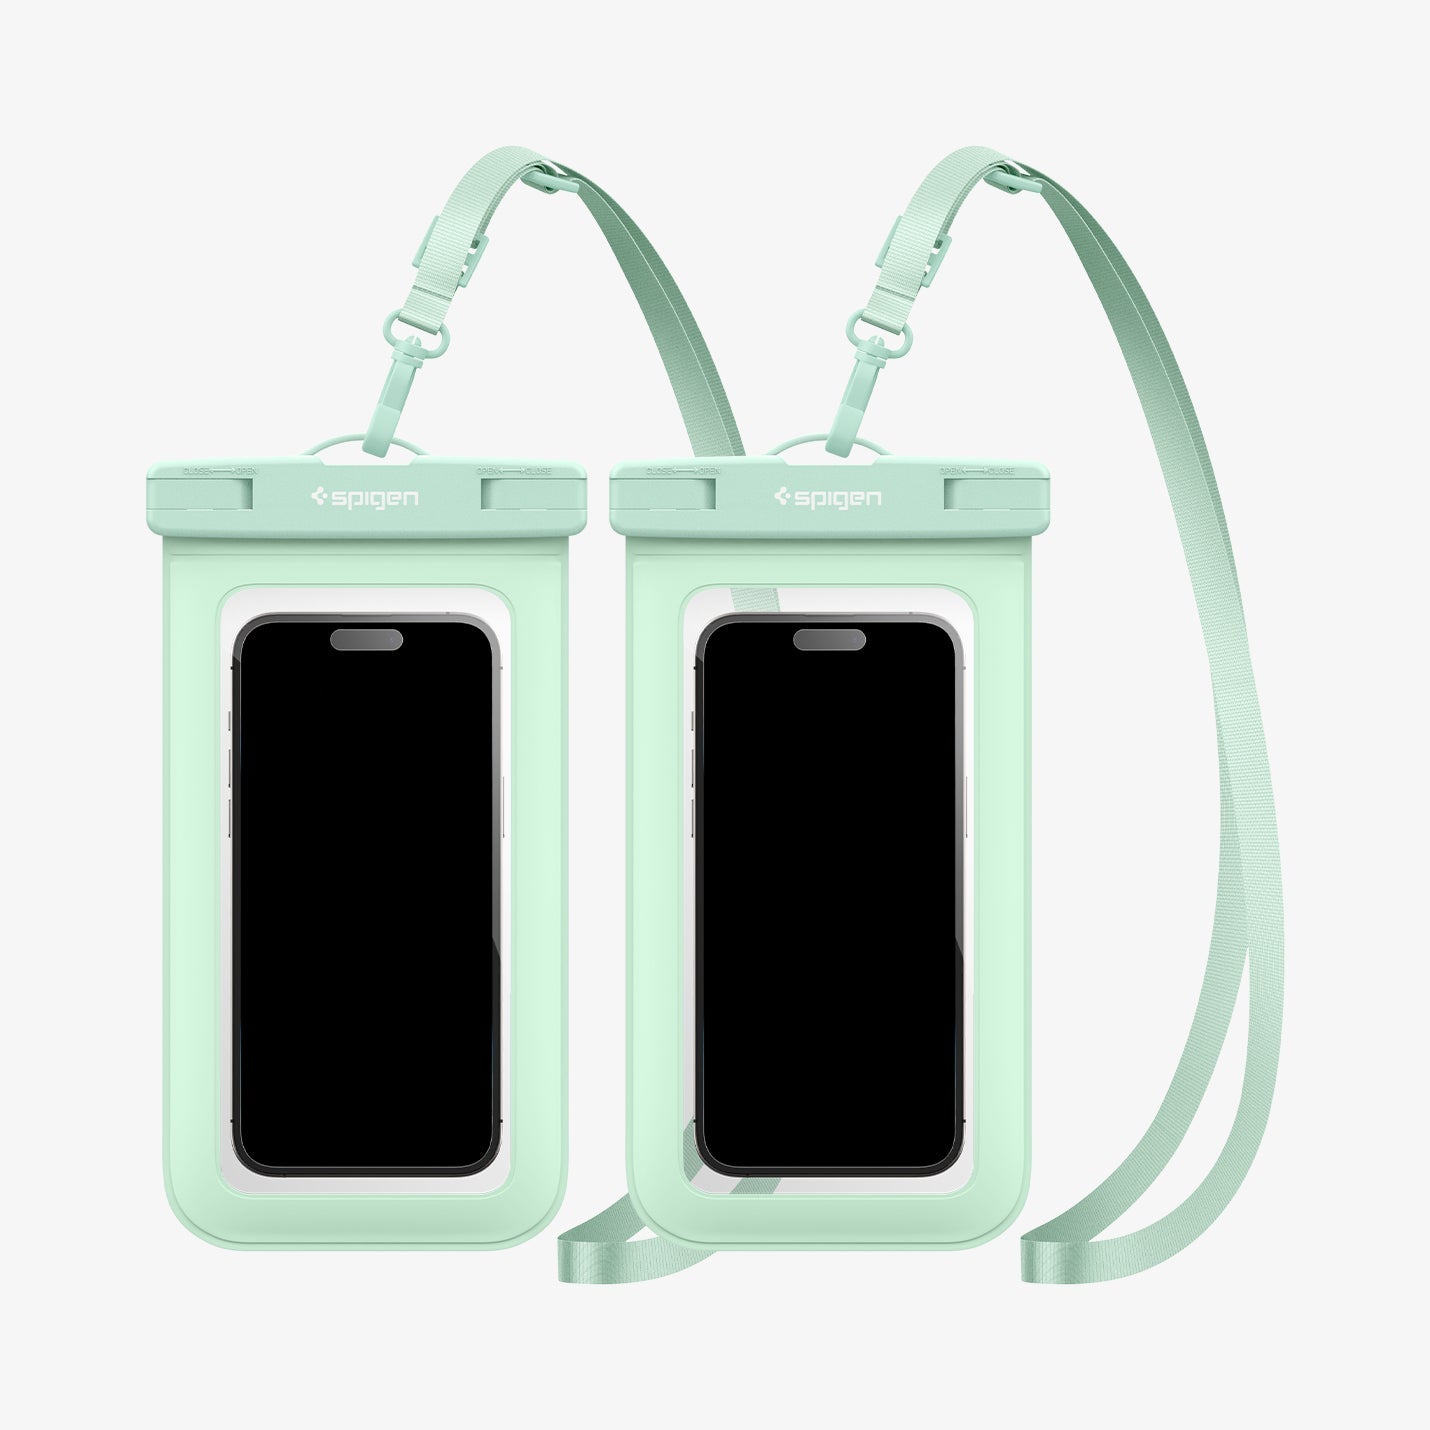 ACS06015 - AquaShield Waterproof Case (2 Pack) A601 in Mint showing the front of two devices inside a waterproof case with straps attached